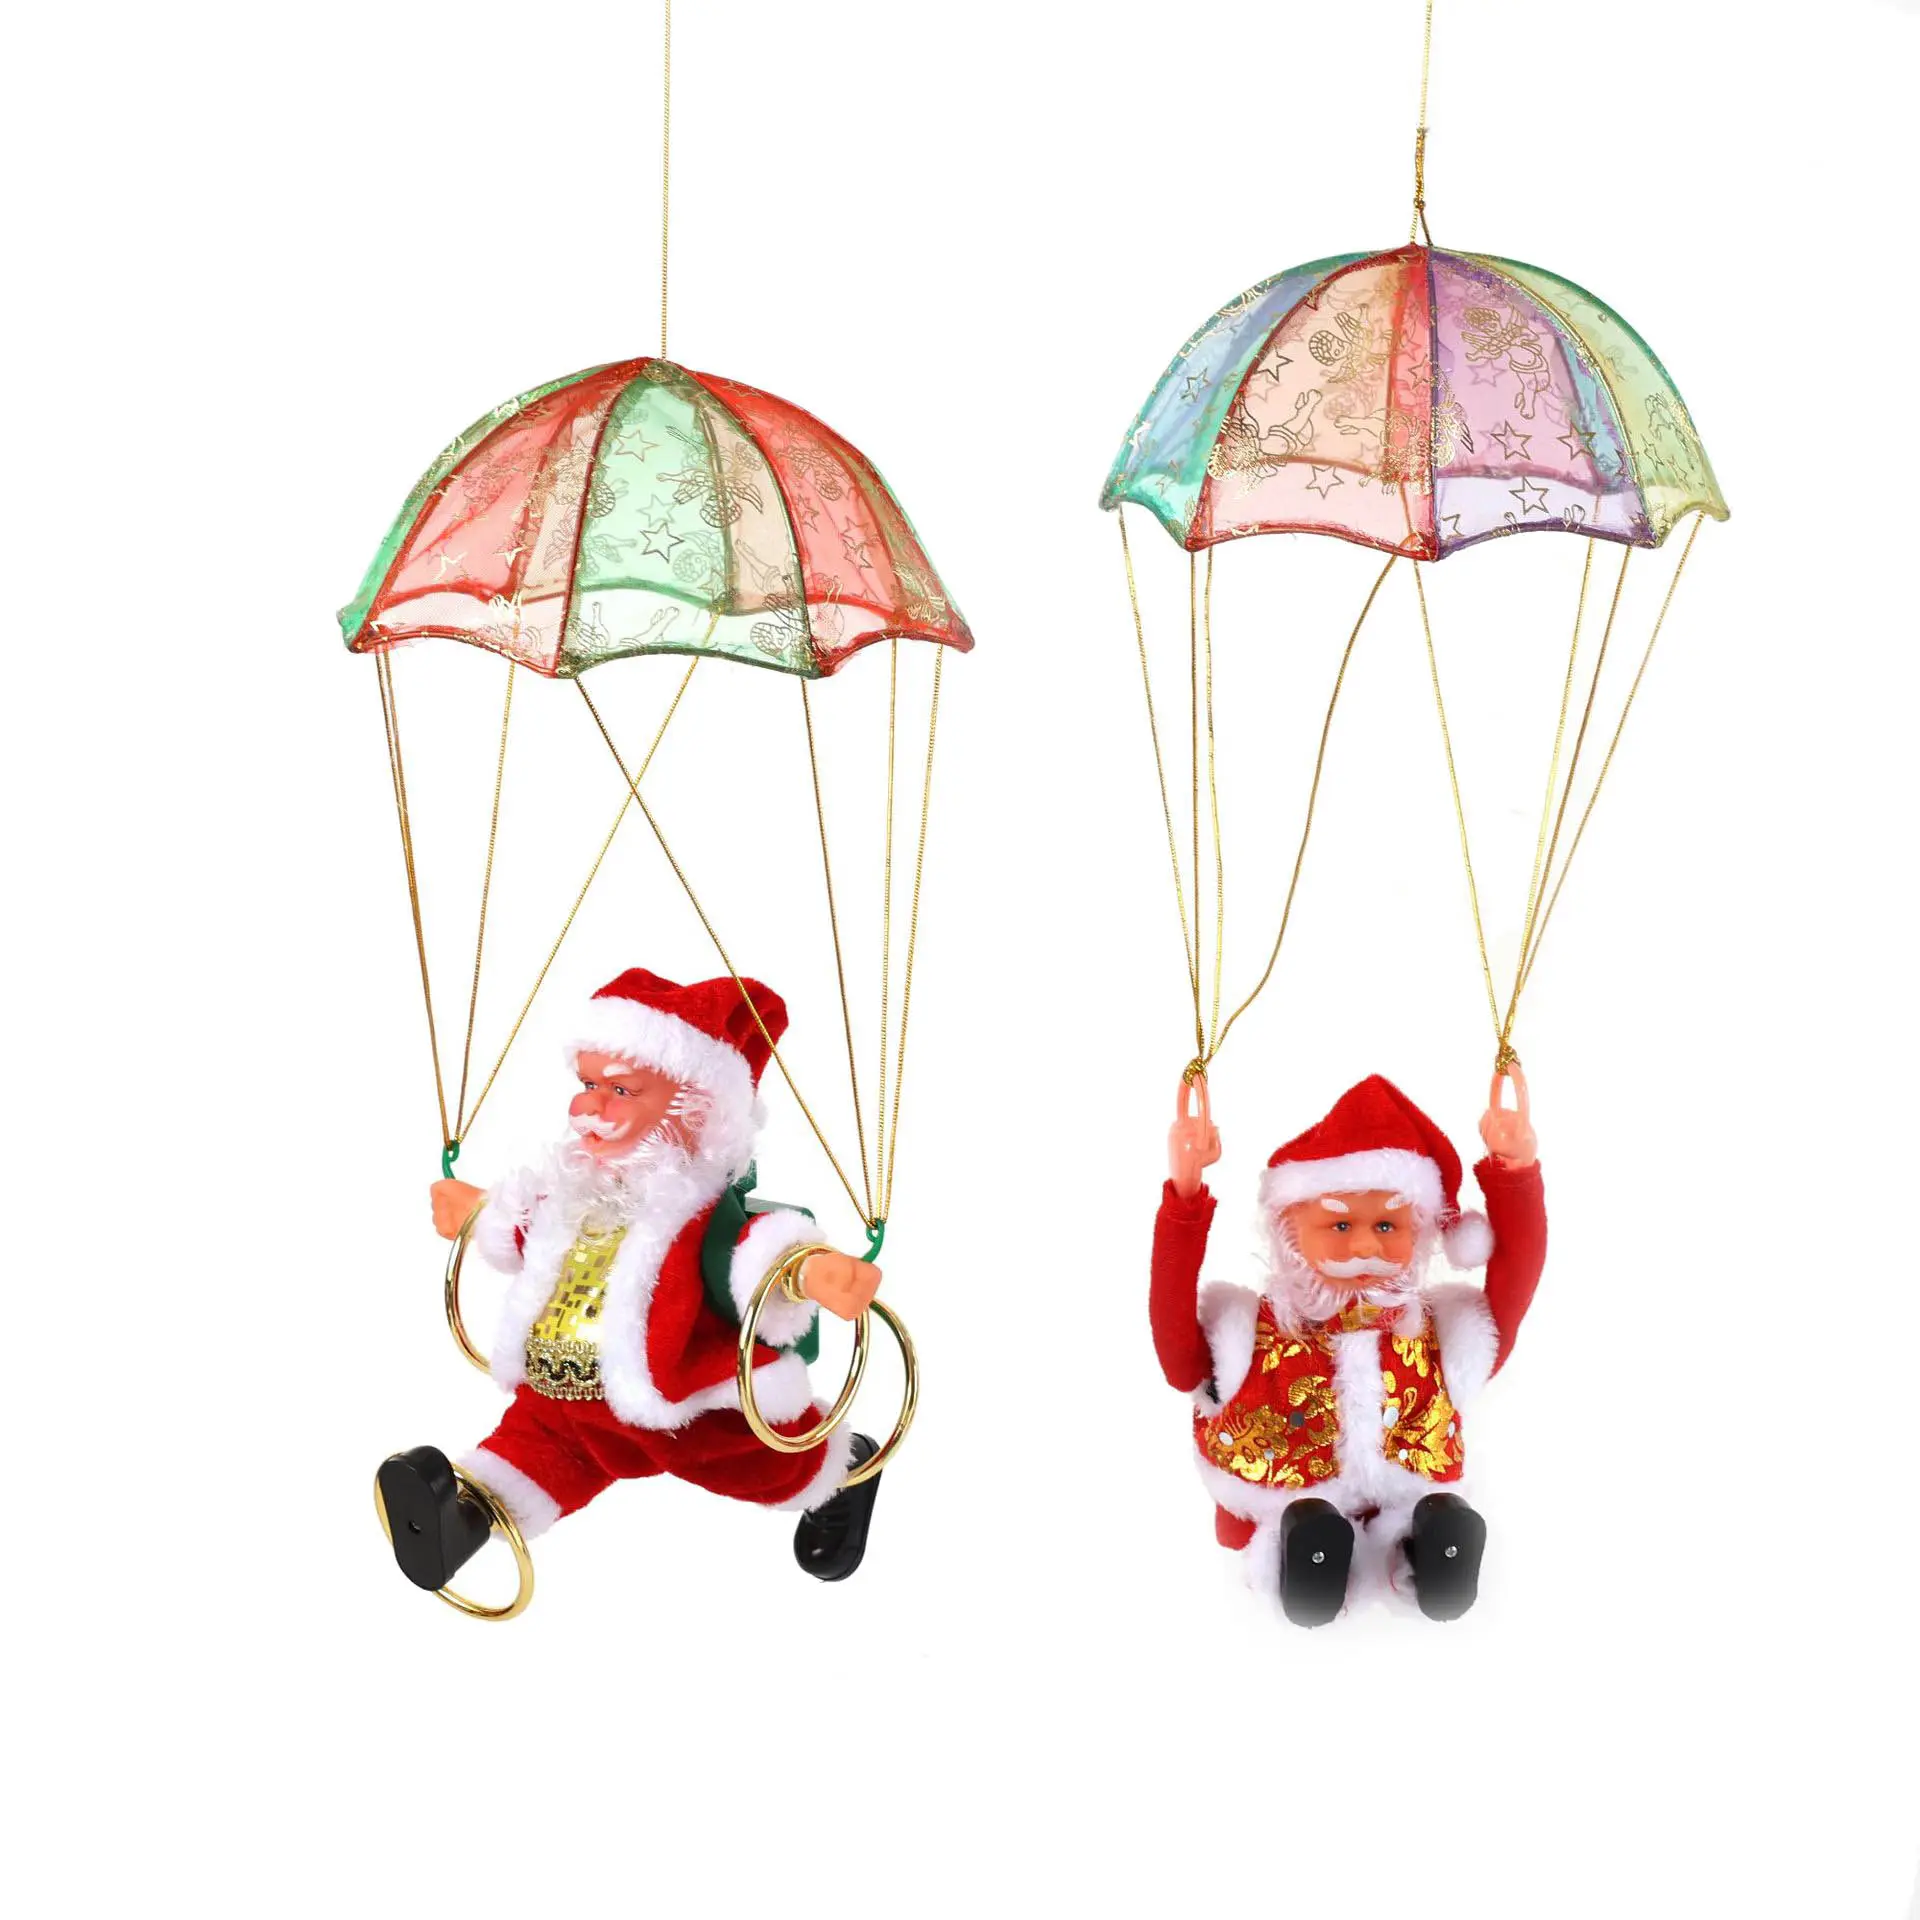 Electric Skydiving With Parachute Home Holiday Long Beard Cute Christmas Decor Gift Santa Claus Figurine Party